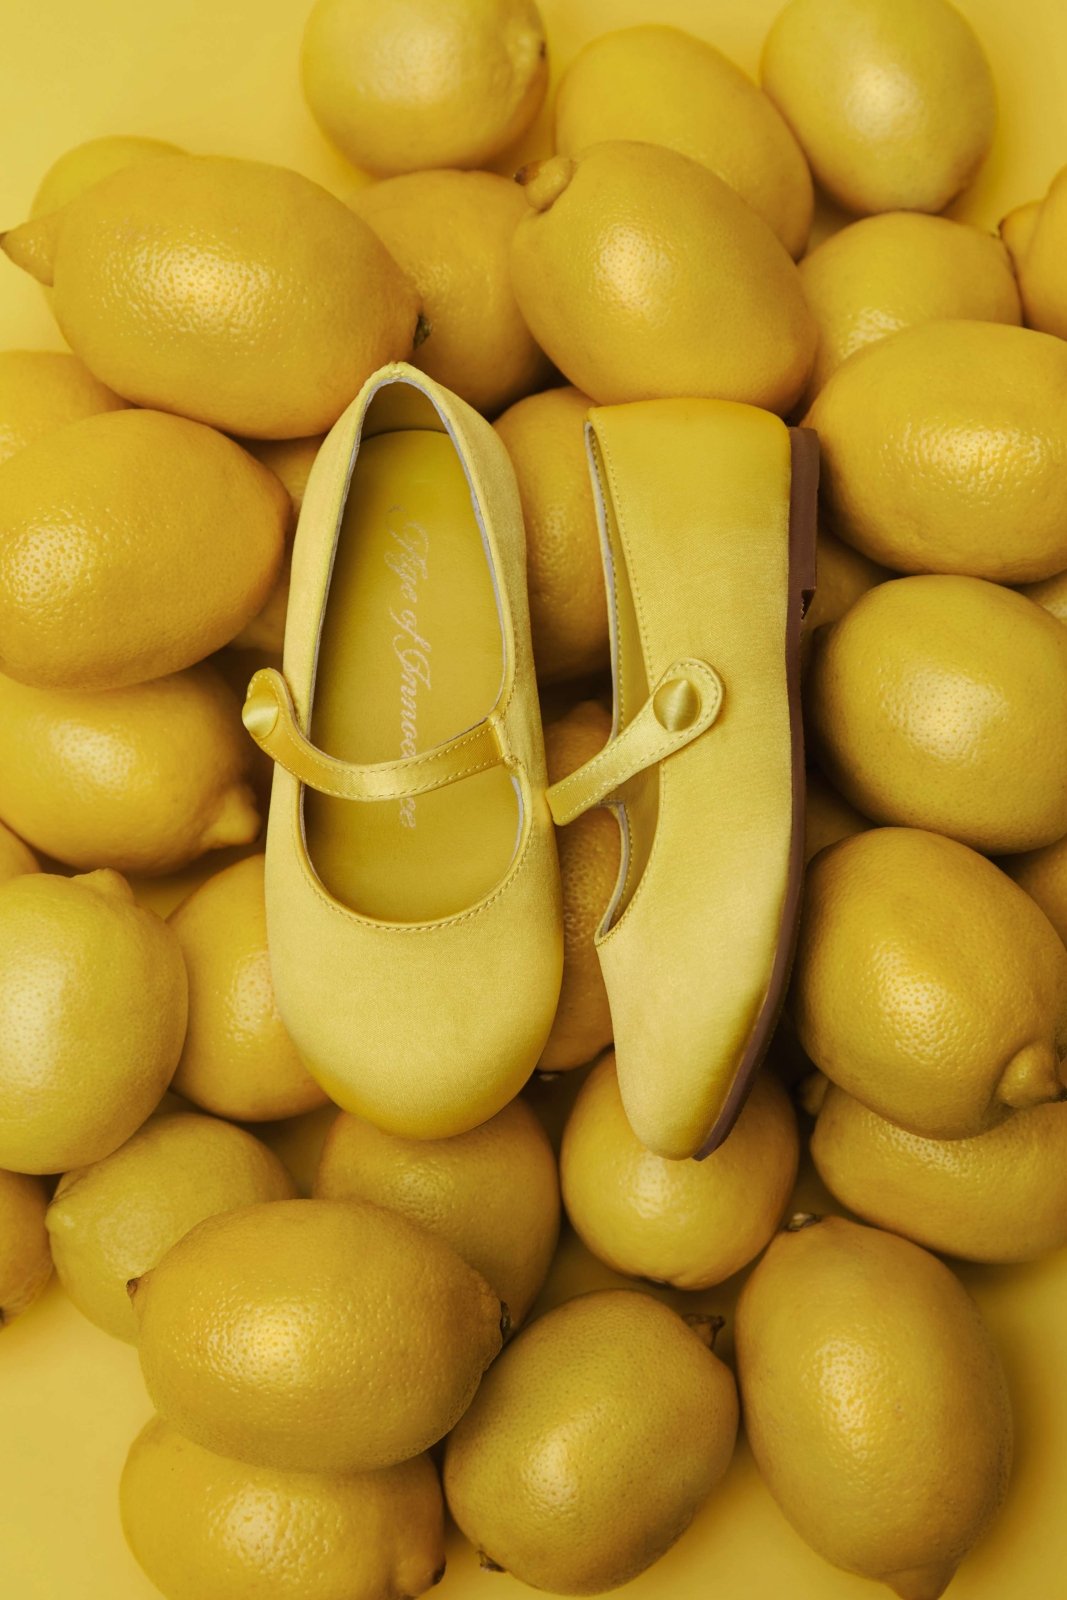 Elin Satin Yellow Shoes by Age of Innocence